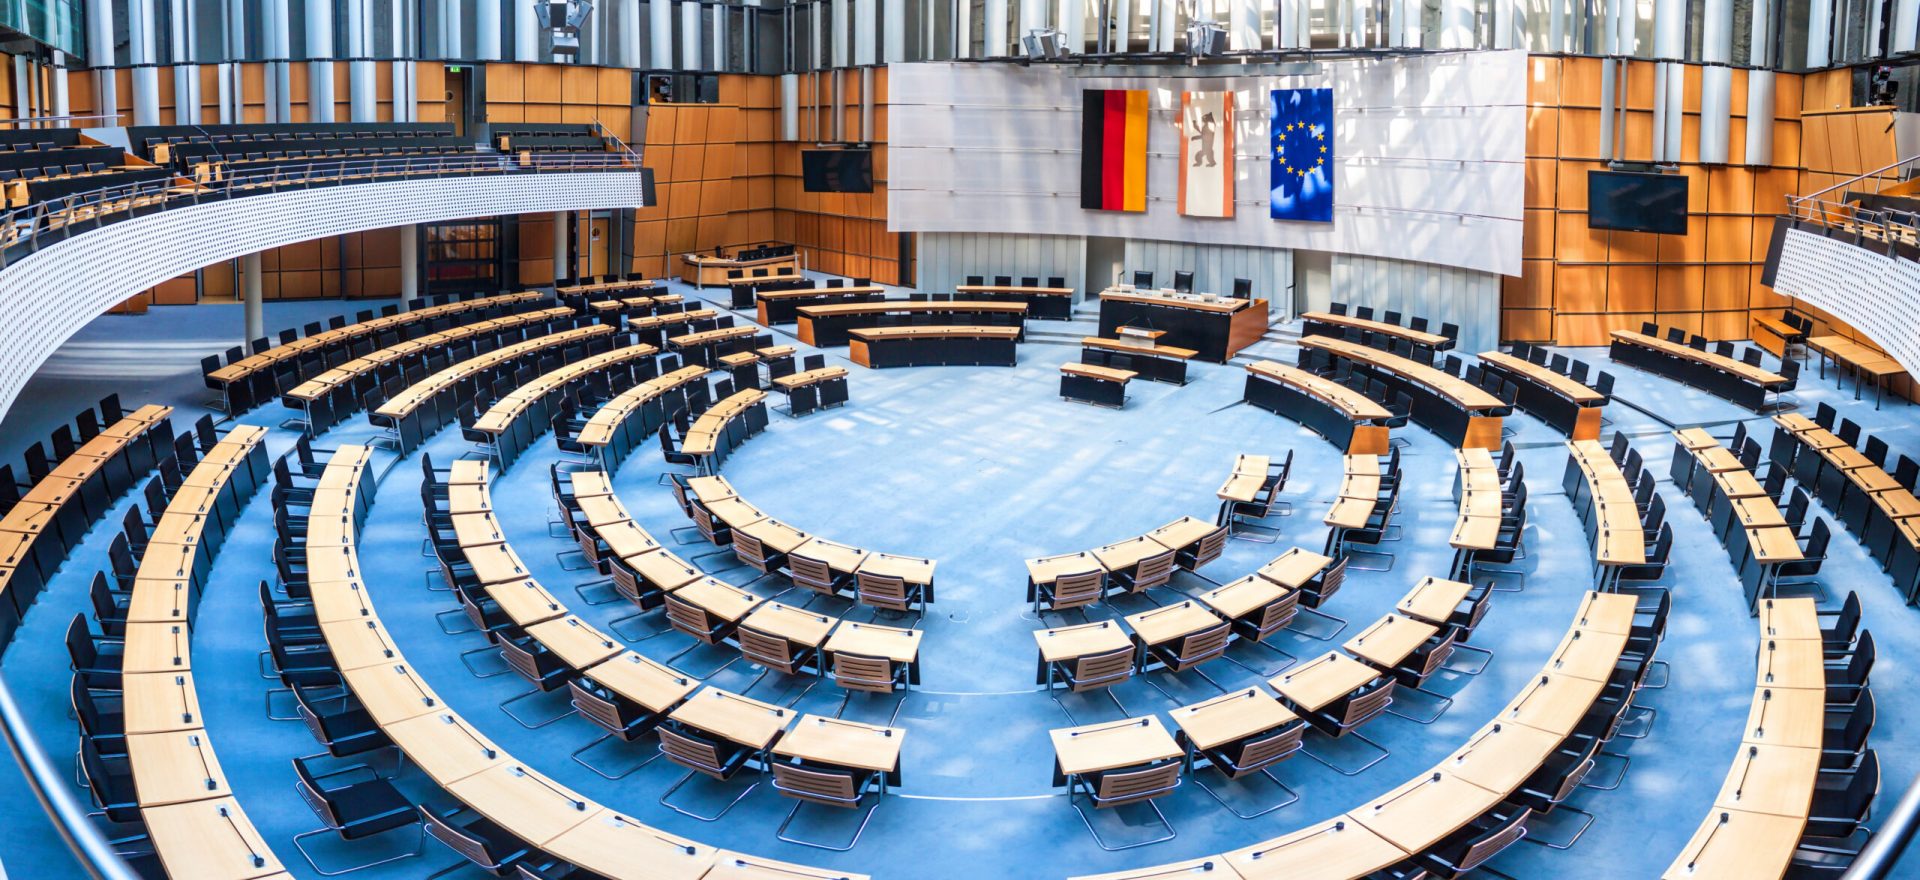 Interior of state parliament (Landtag) in Berlin, Germany